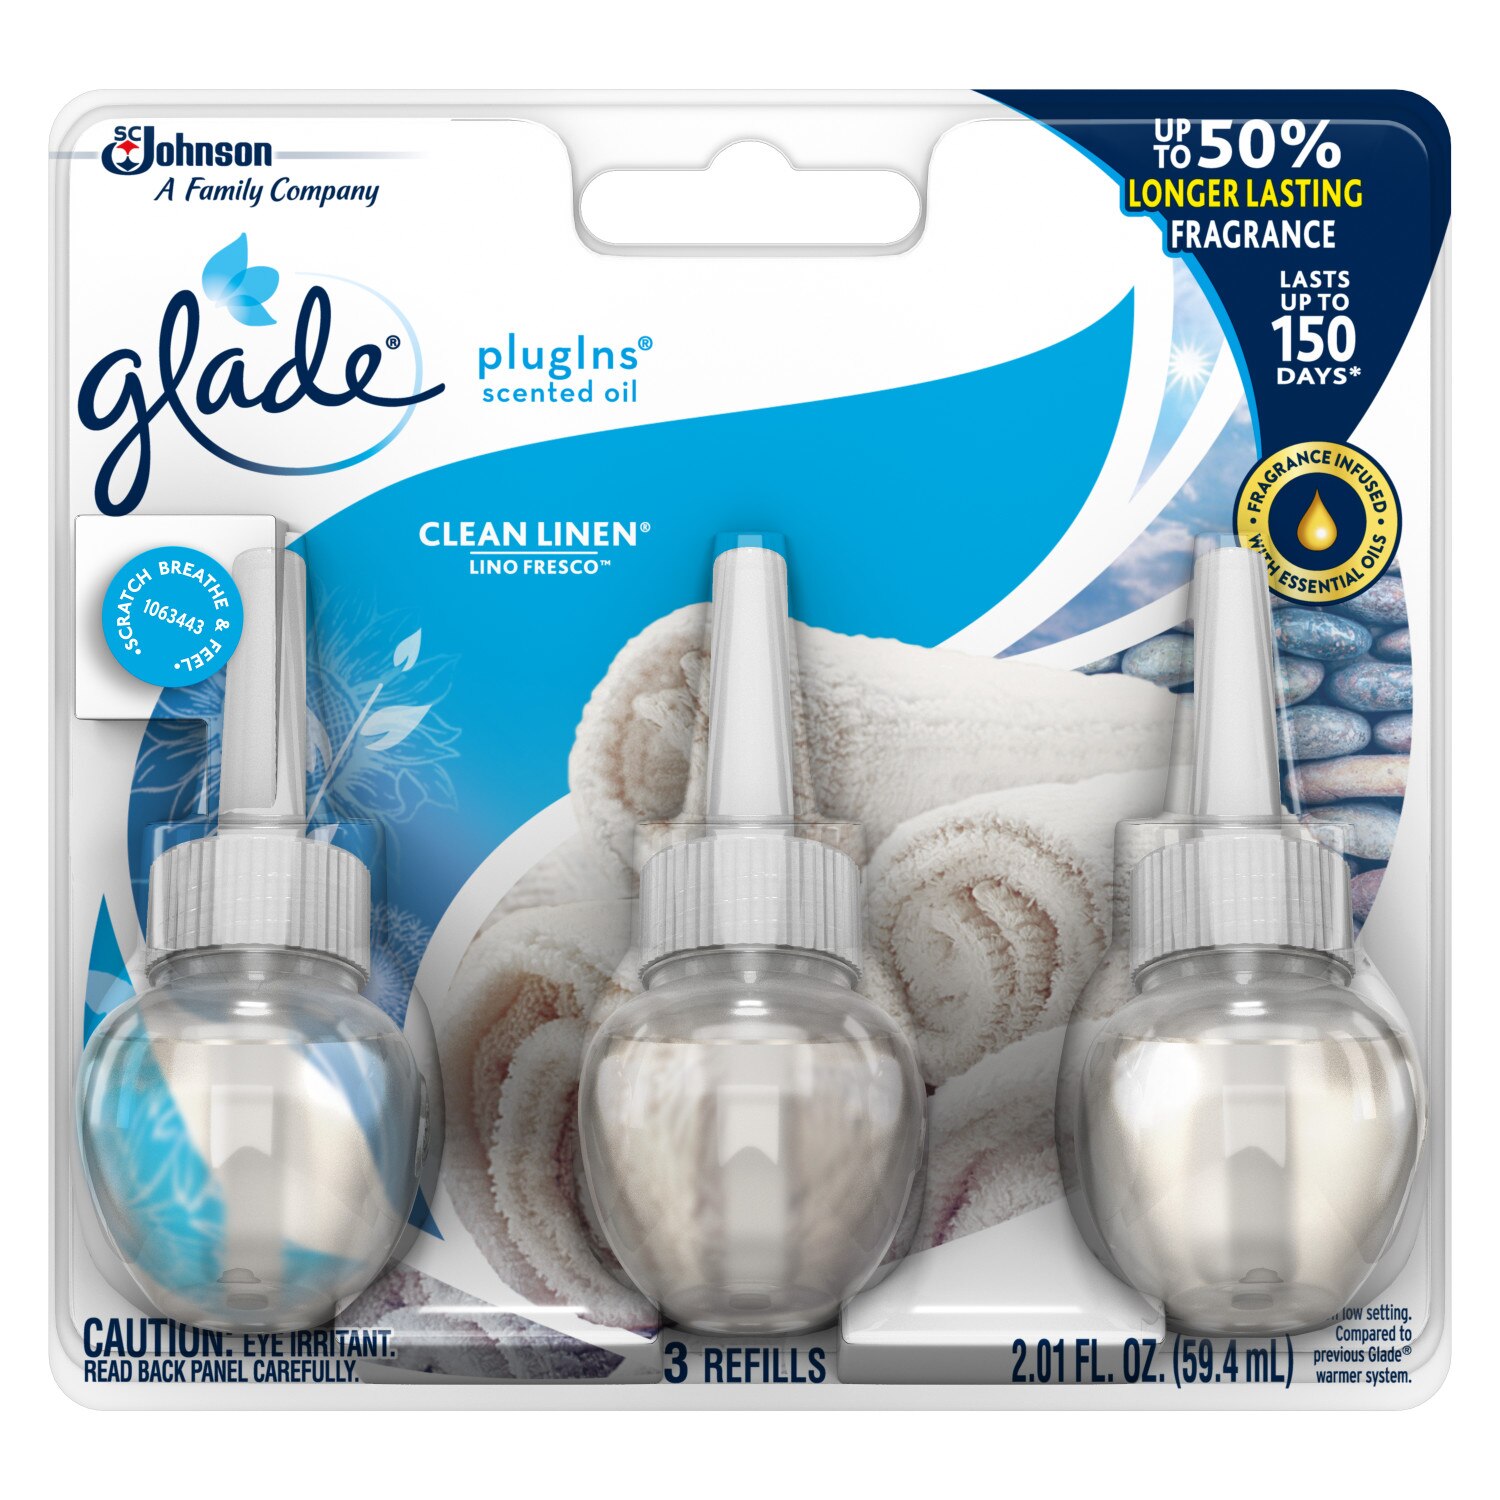 Glade PlugIns Scented Oil Refill Essential Oil Infused Wall Plug In, 3 CT